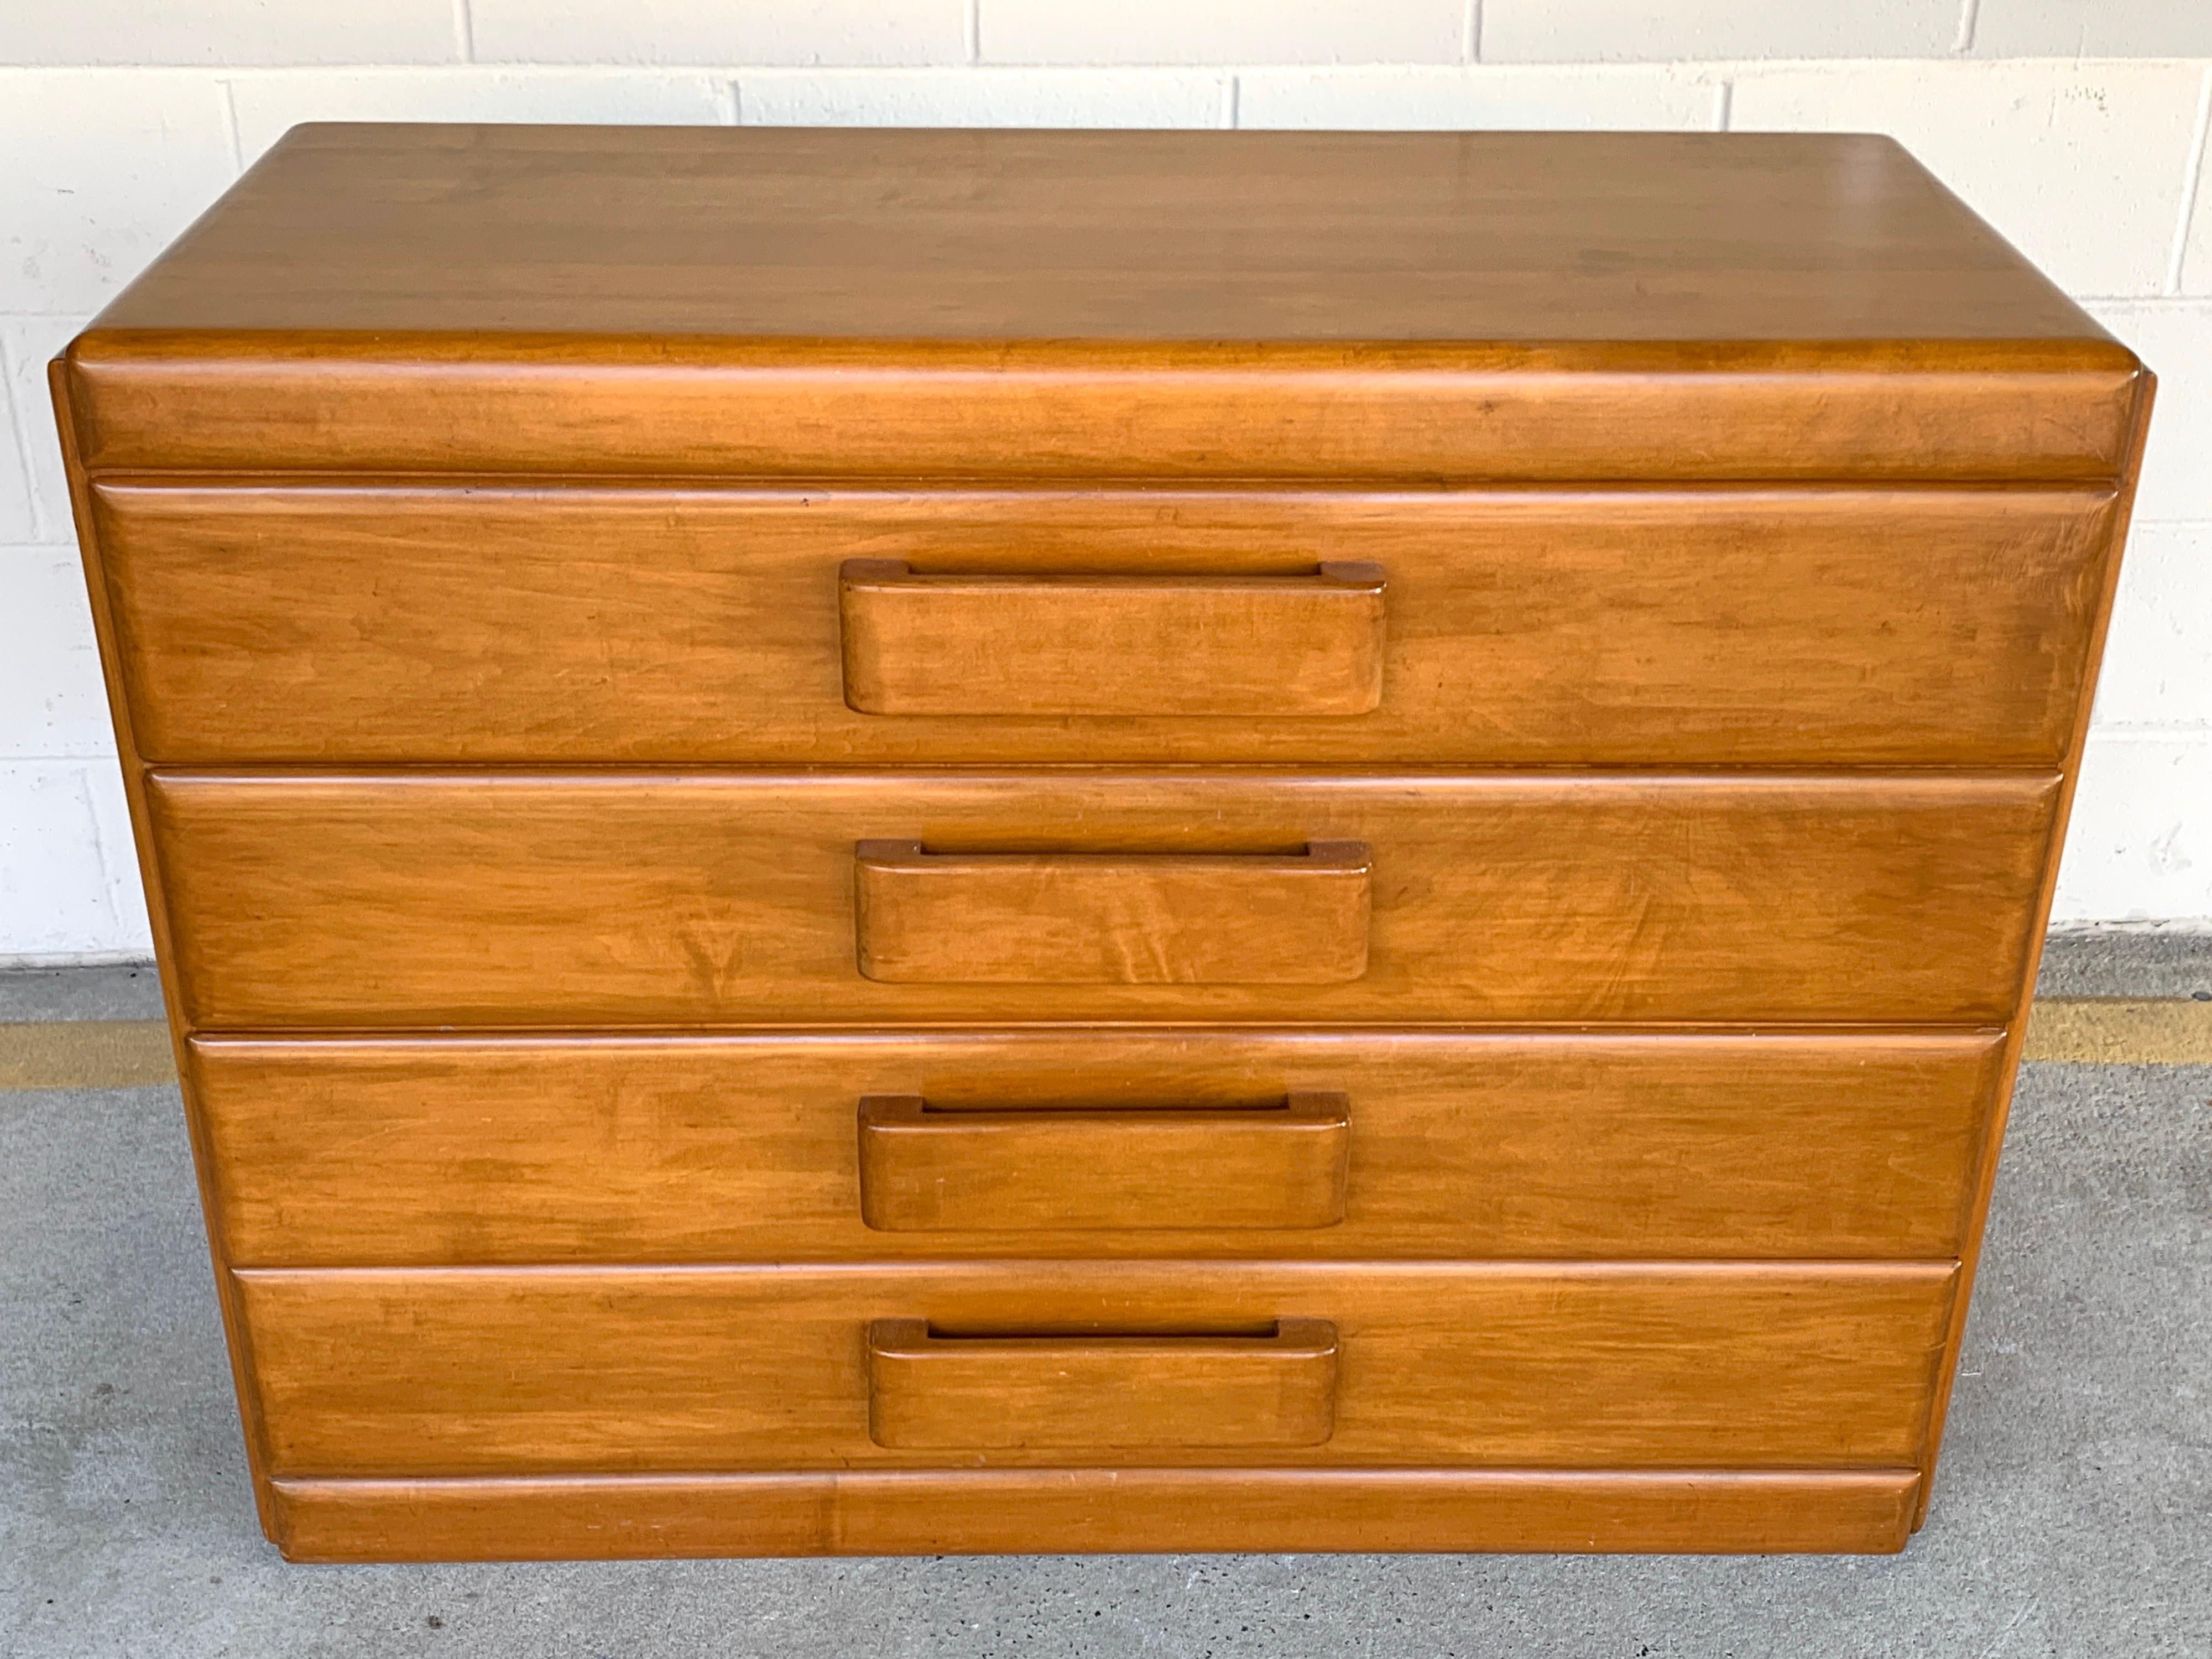 American modern blonde chest of drawers, Designed by Russel Wright, circa 1950
fitted with four 43